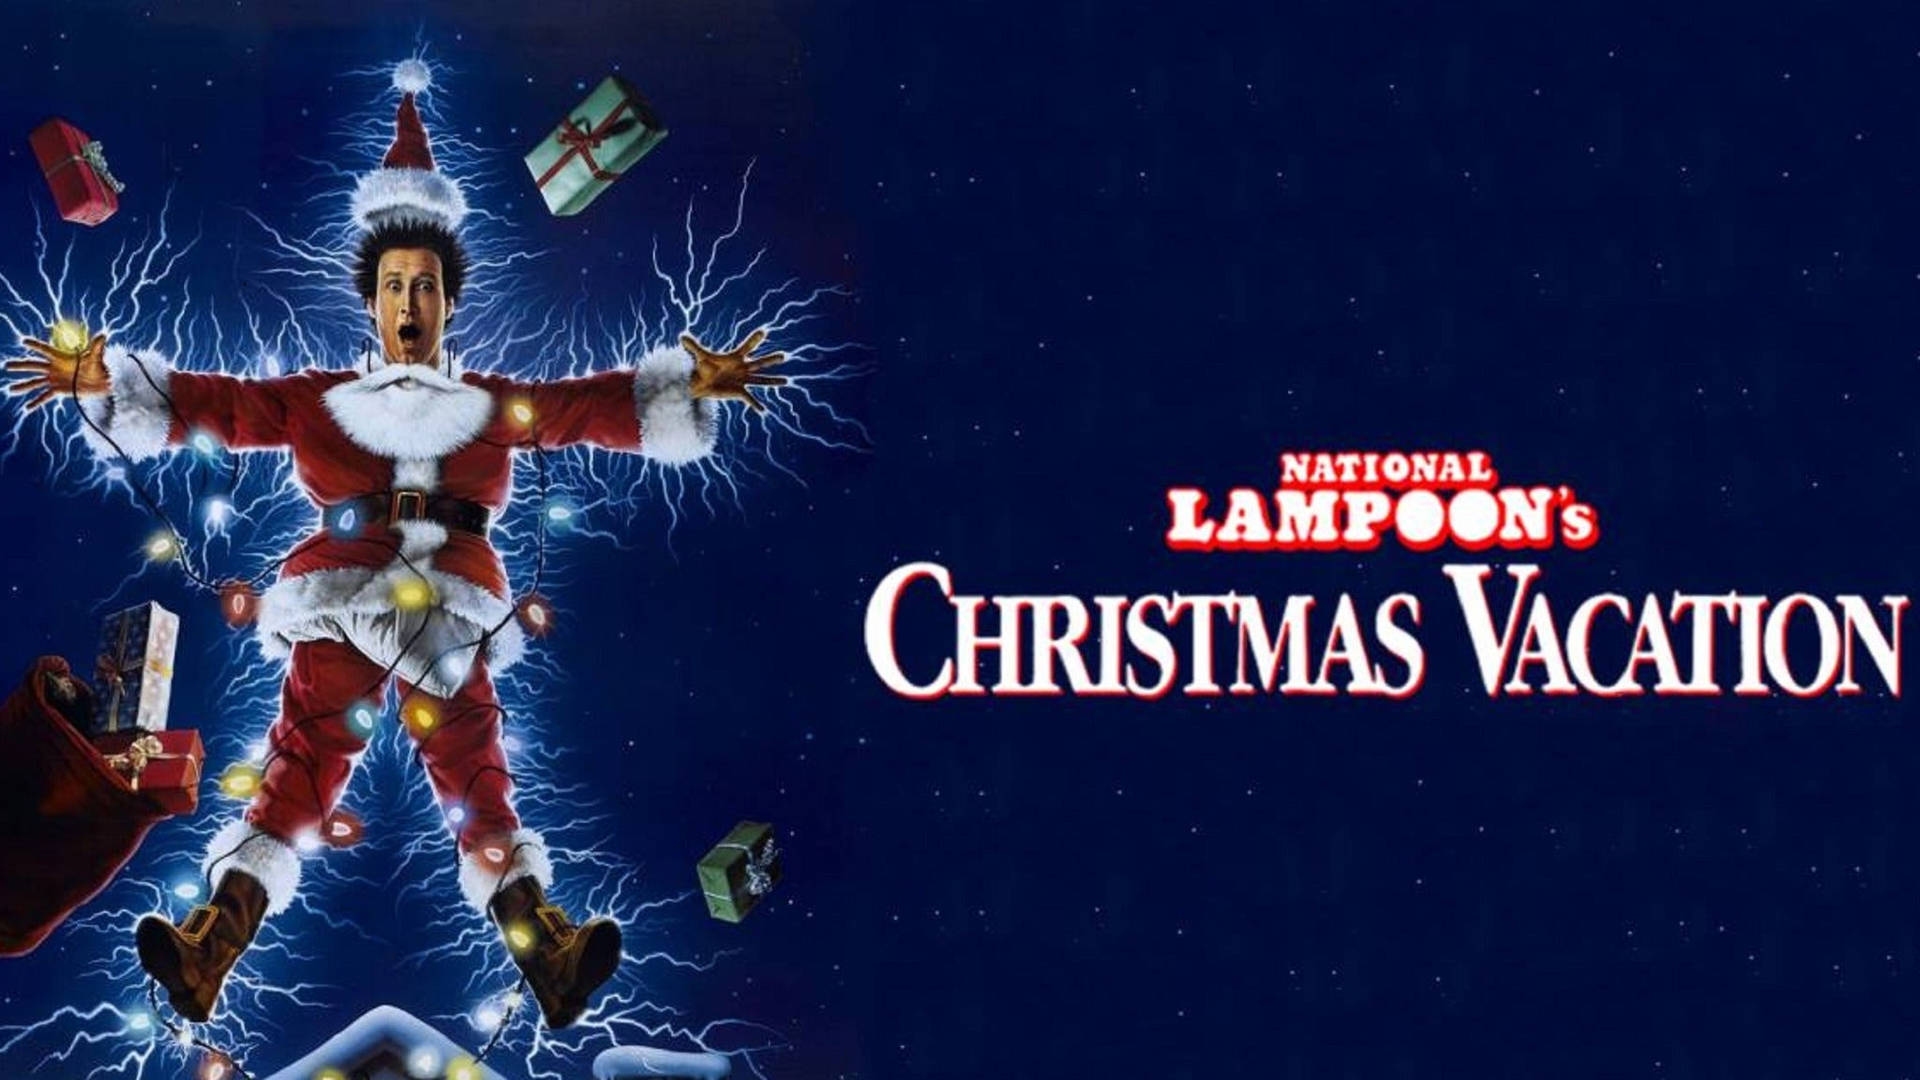 National Lampoons Christmas Vacation Movie Poster Wallpaper